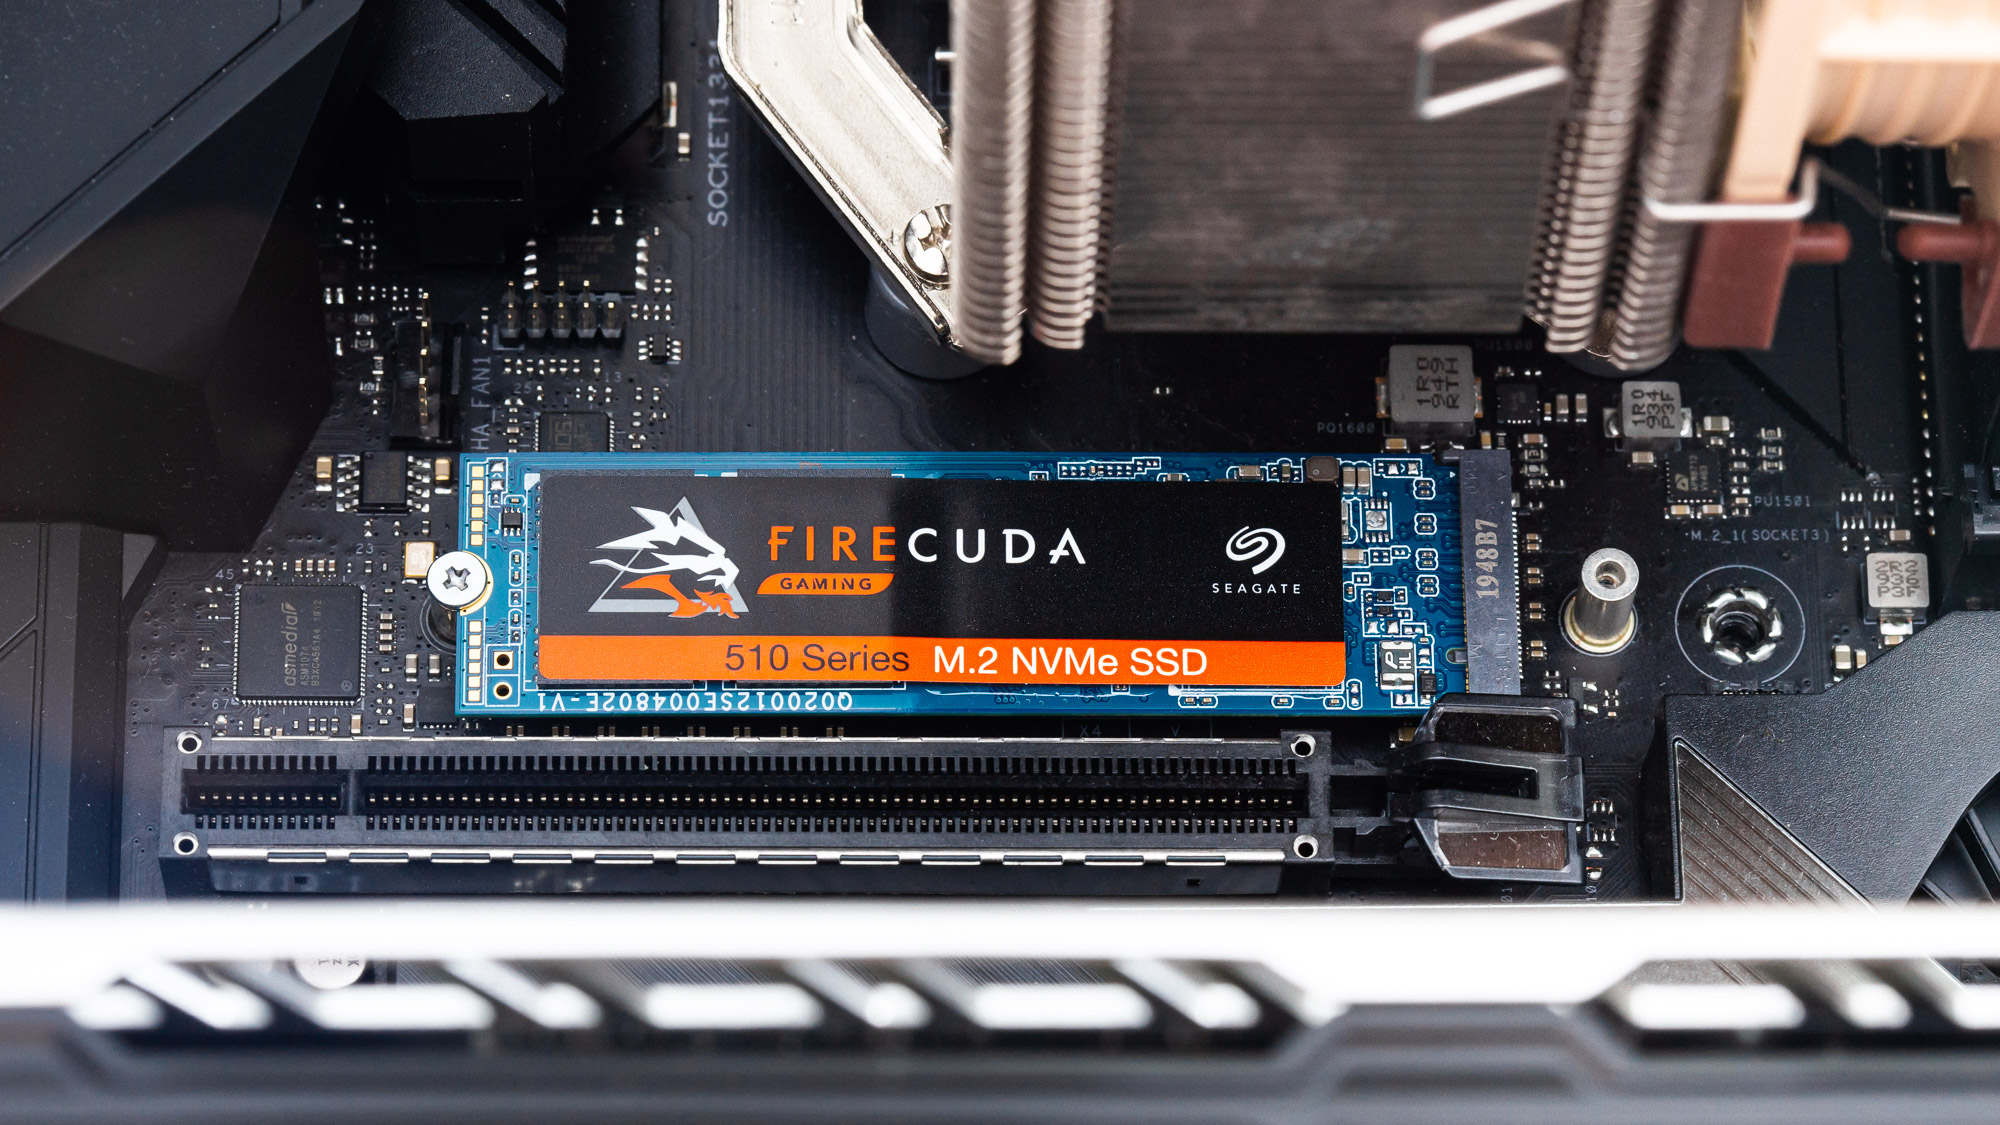 Seagate FireCuda 510 M.2 NVMe SSD Review: One Expensive Fish